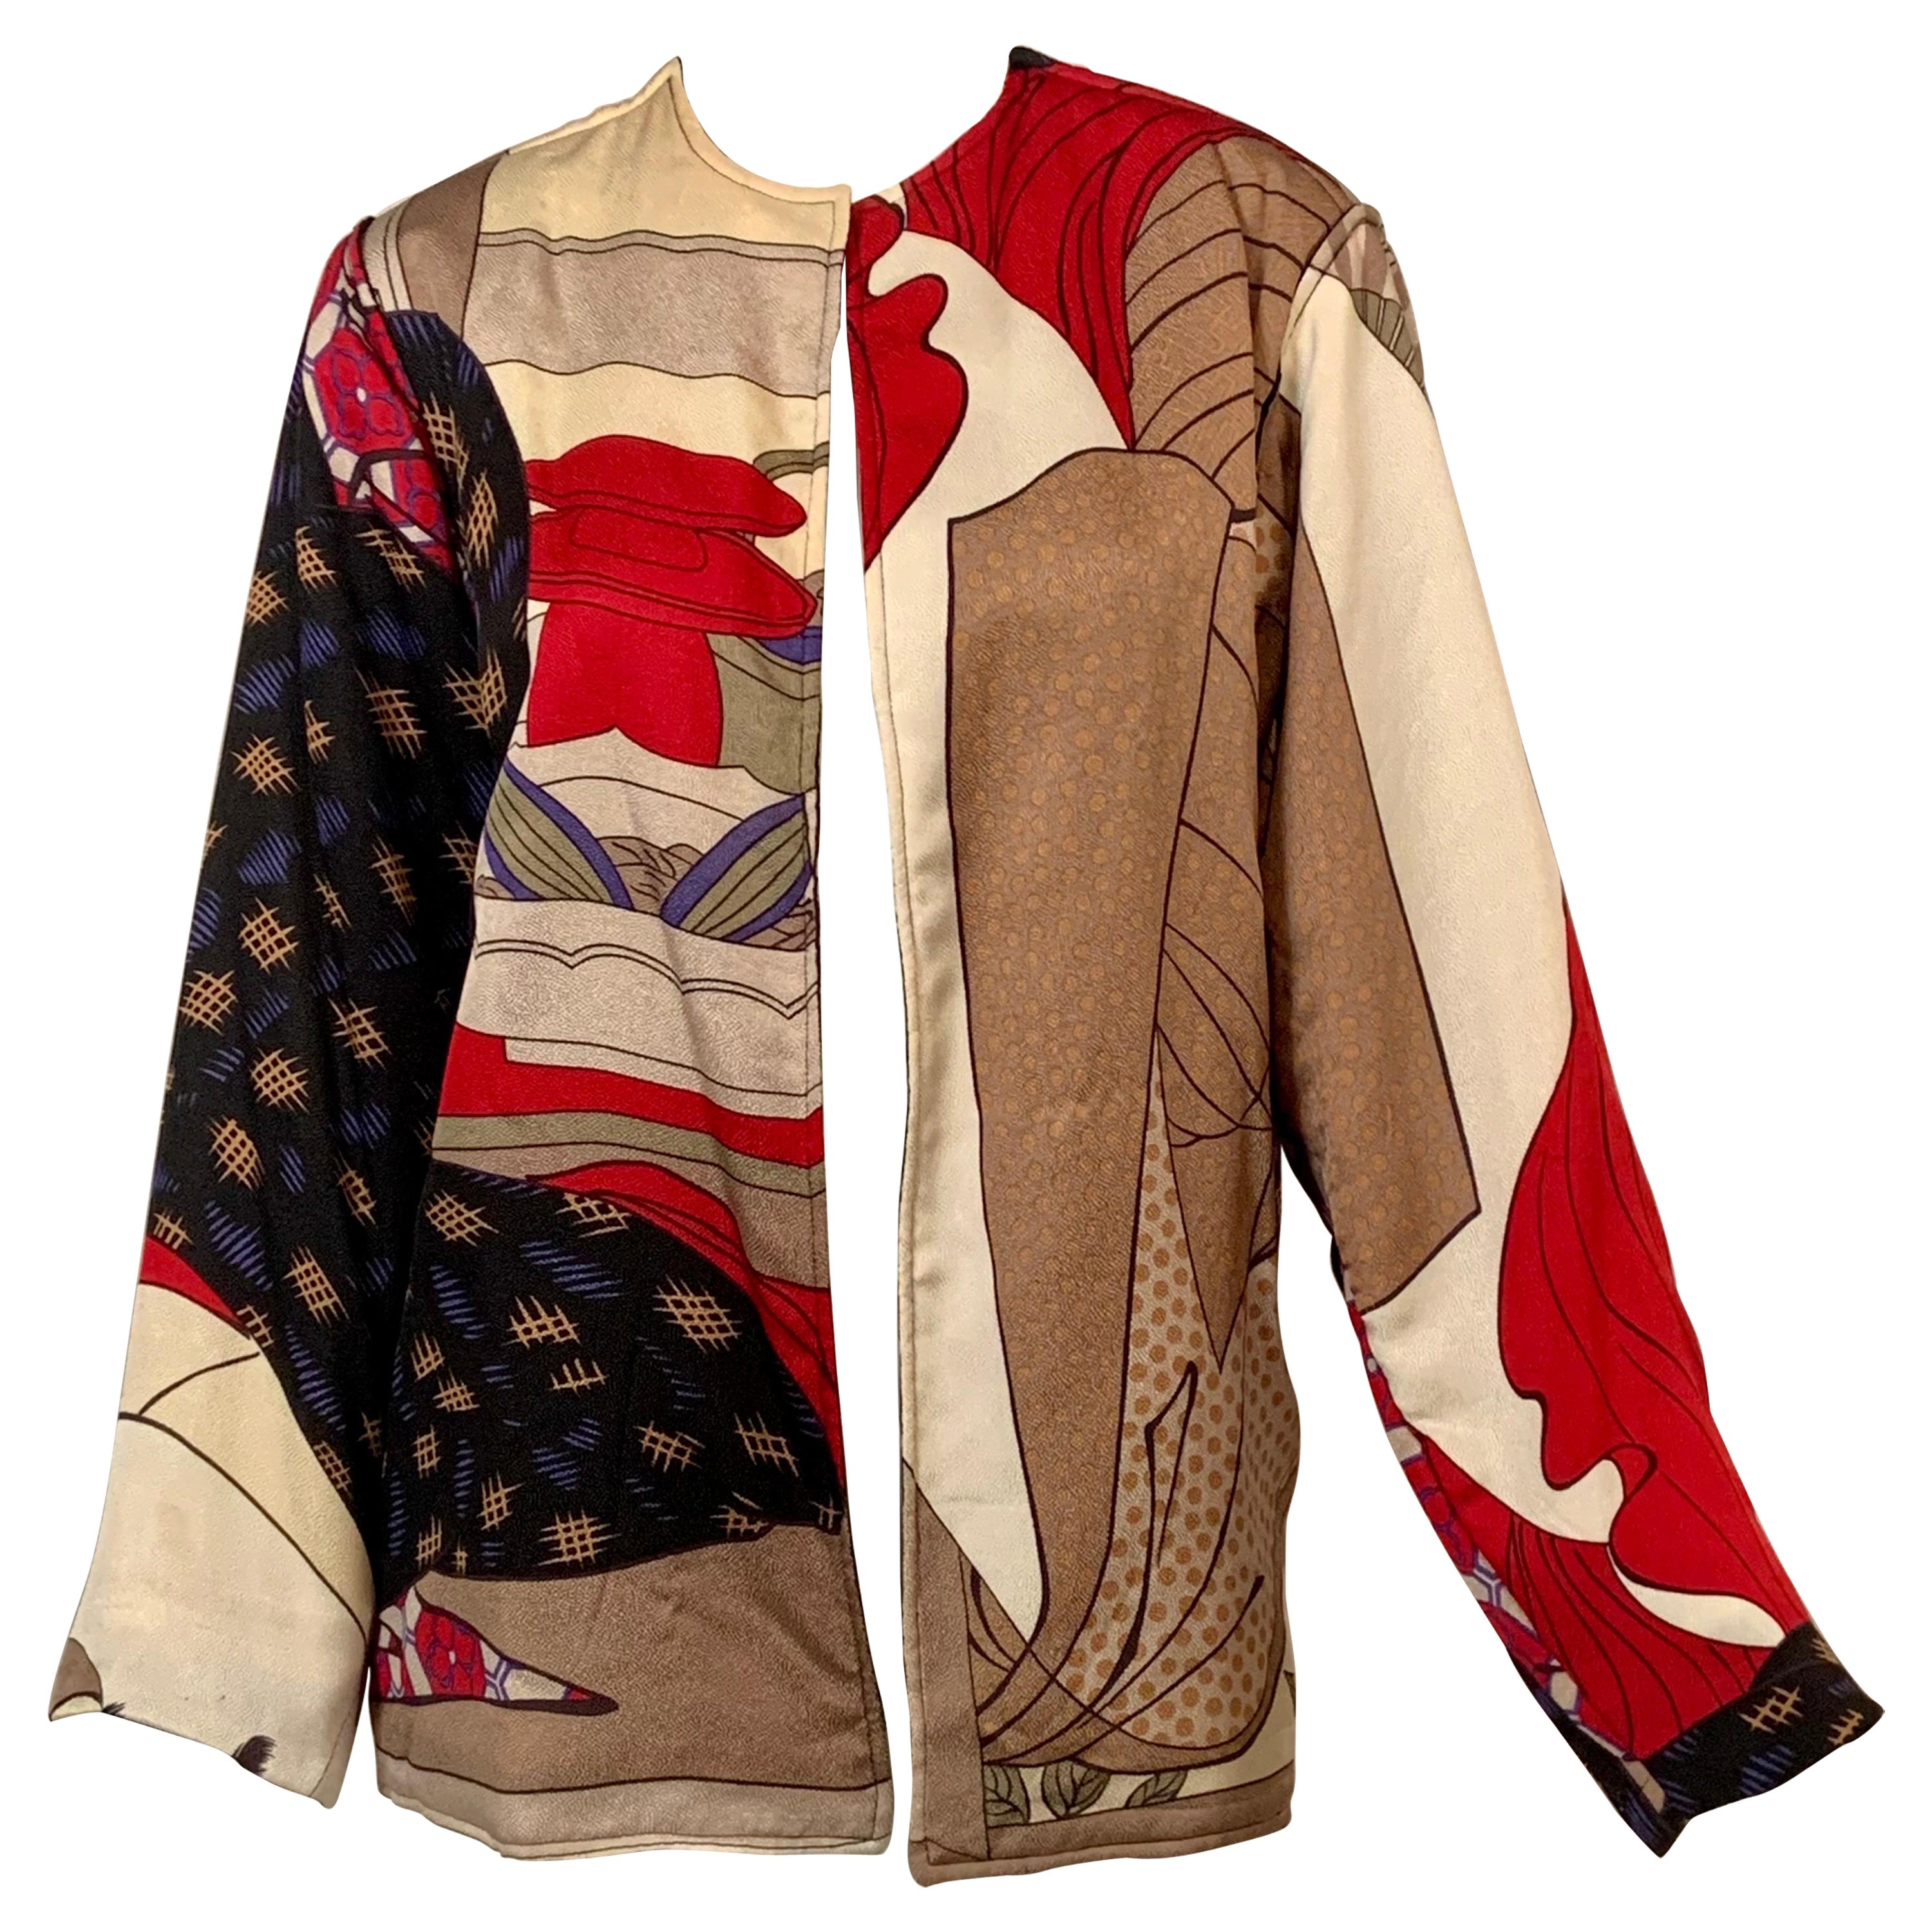 Jacques Molko Paris Colorful Asian Inspired Silk Print Jacket For Sale